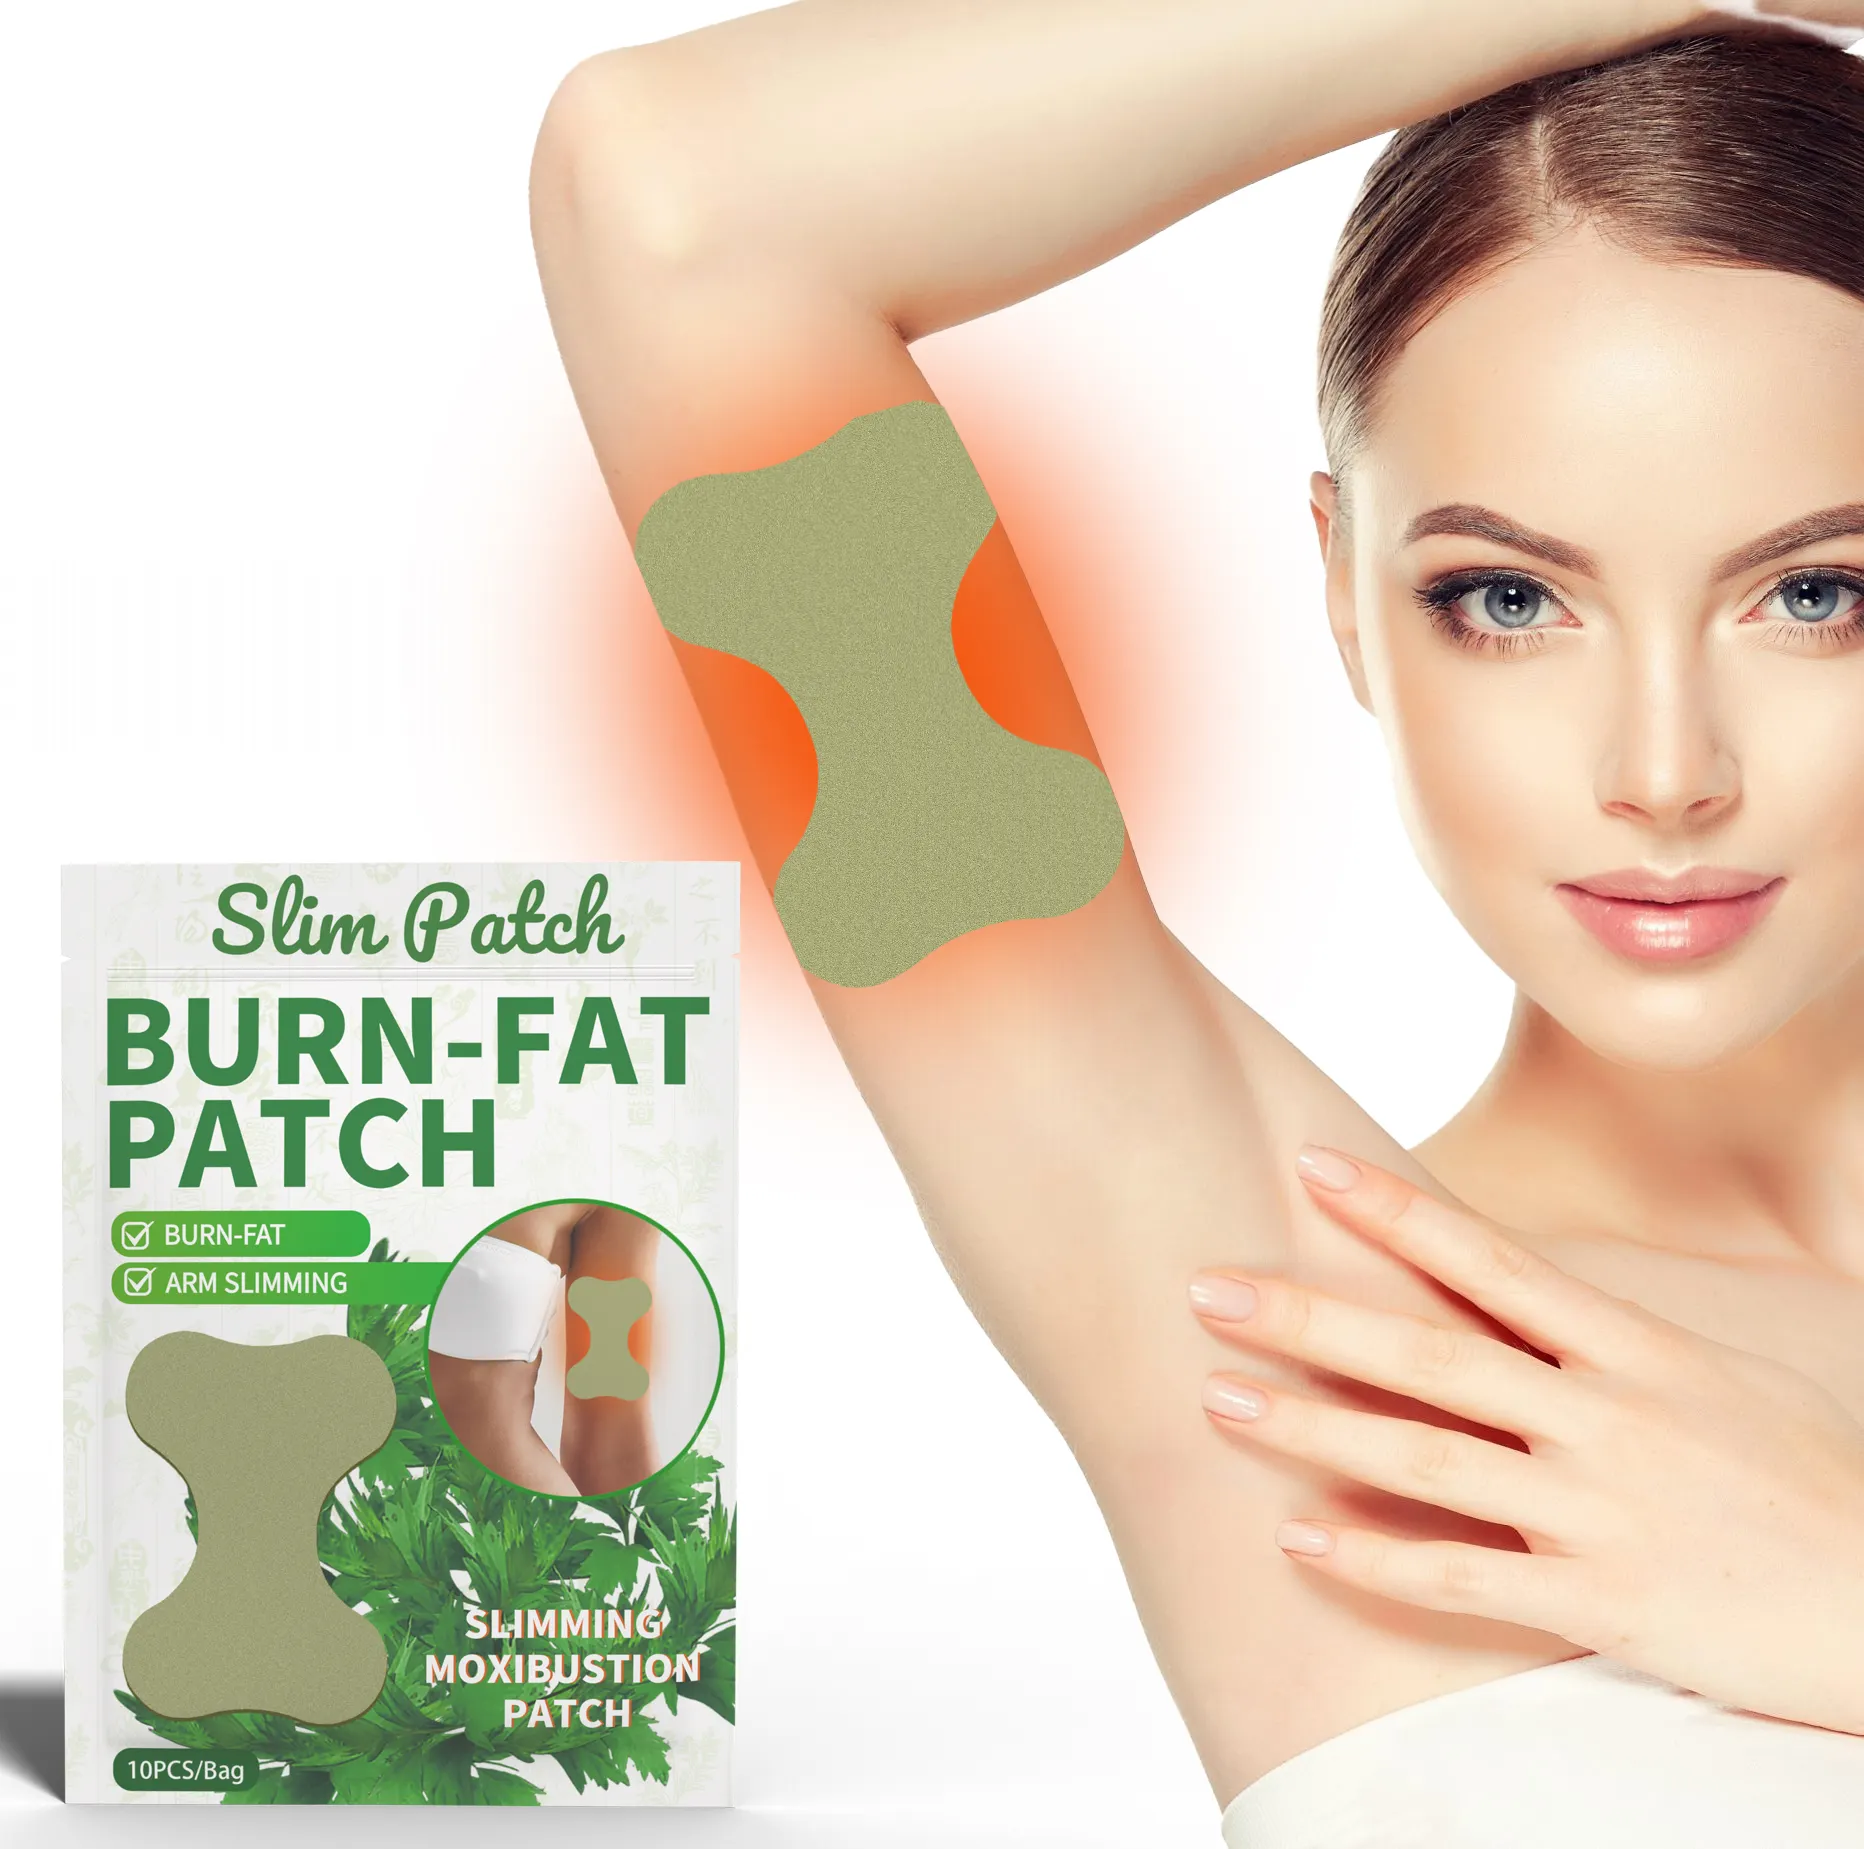 High Quality Wormwood Burn-FAT Arm Slimming Moxibustion Patch For Arm Fat Burning Weight Loss - 10 Patches